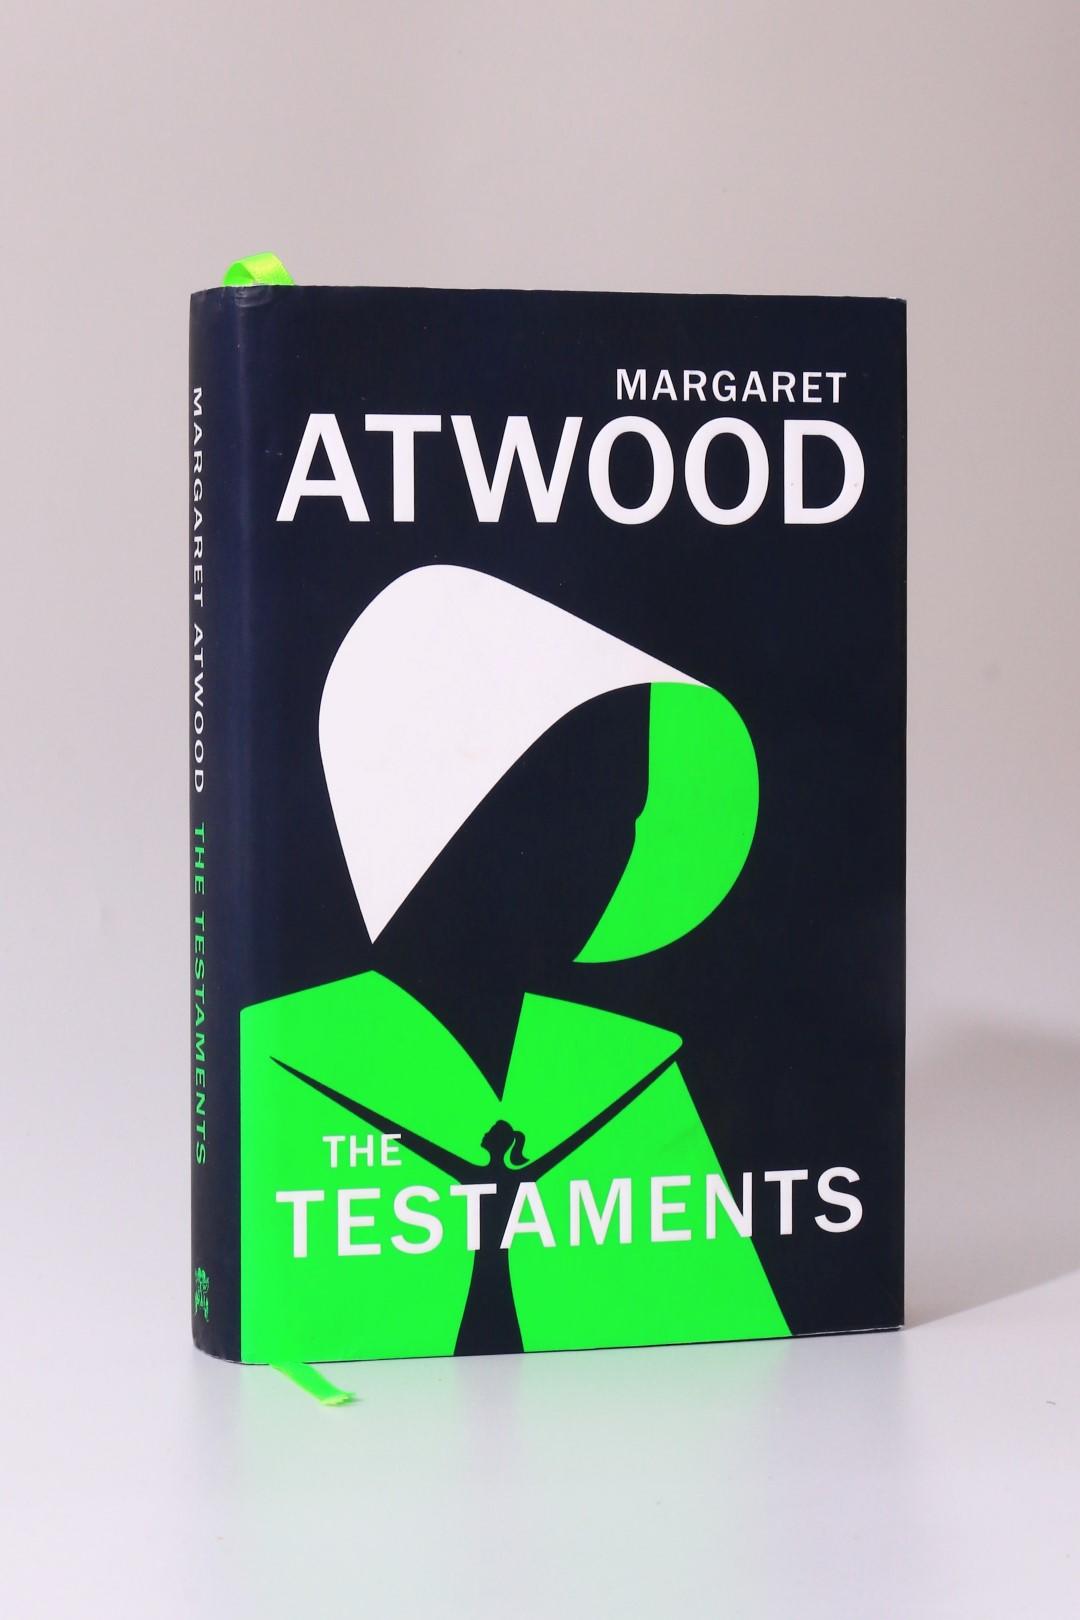 Margaret Atwood - The Testaments - Chatto & Windus, 2019, First Edition.